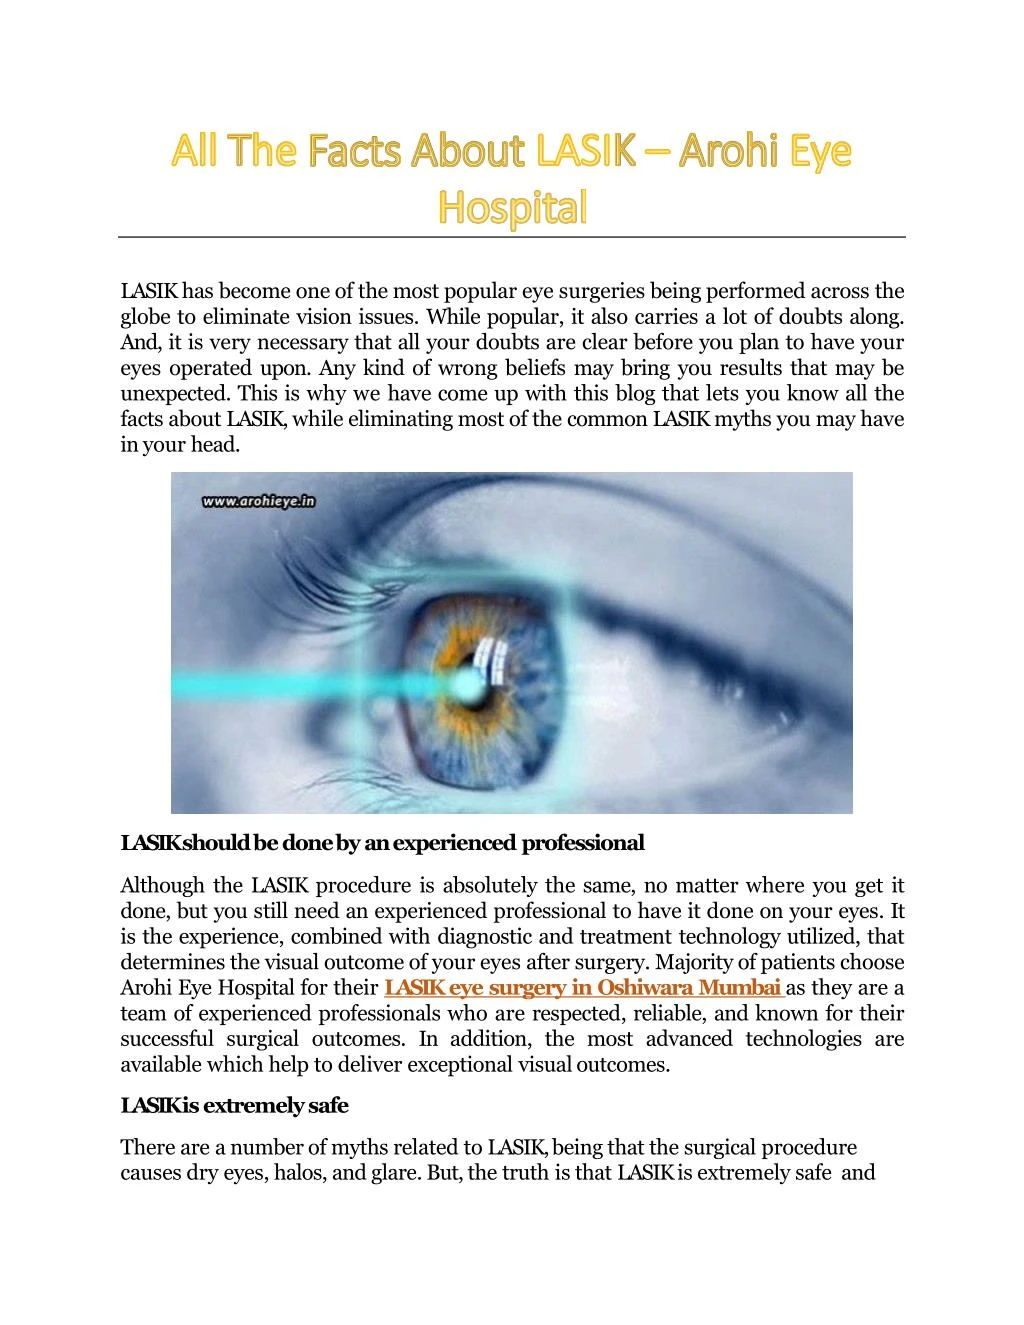 lasik has become one of the most popular